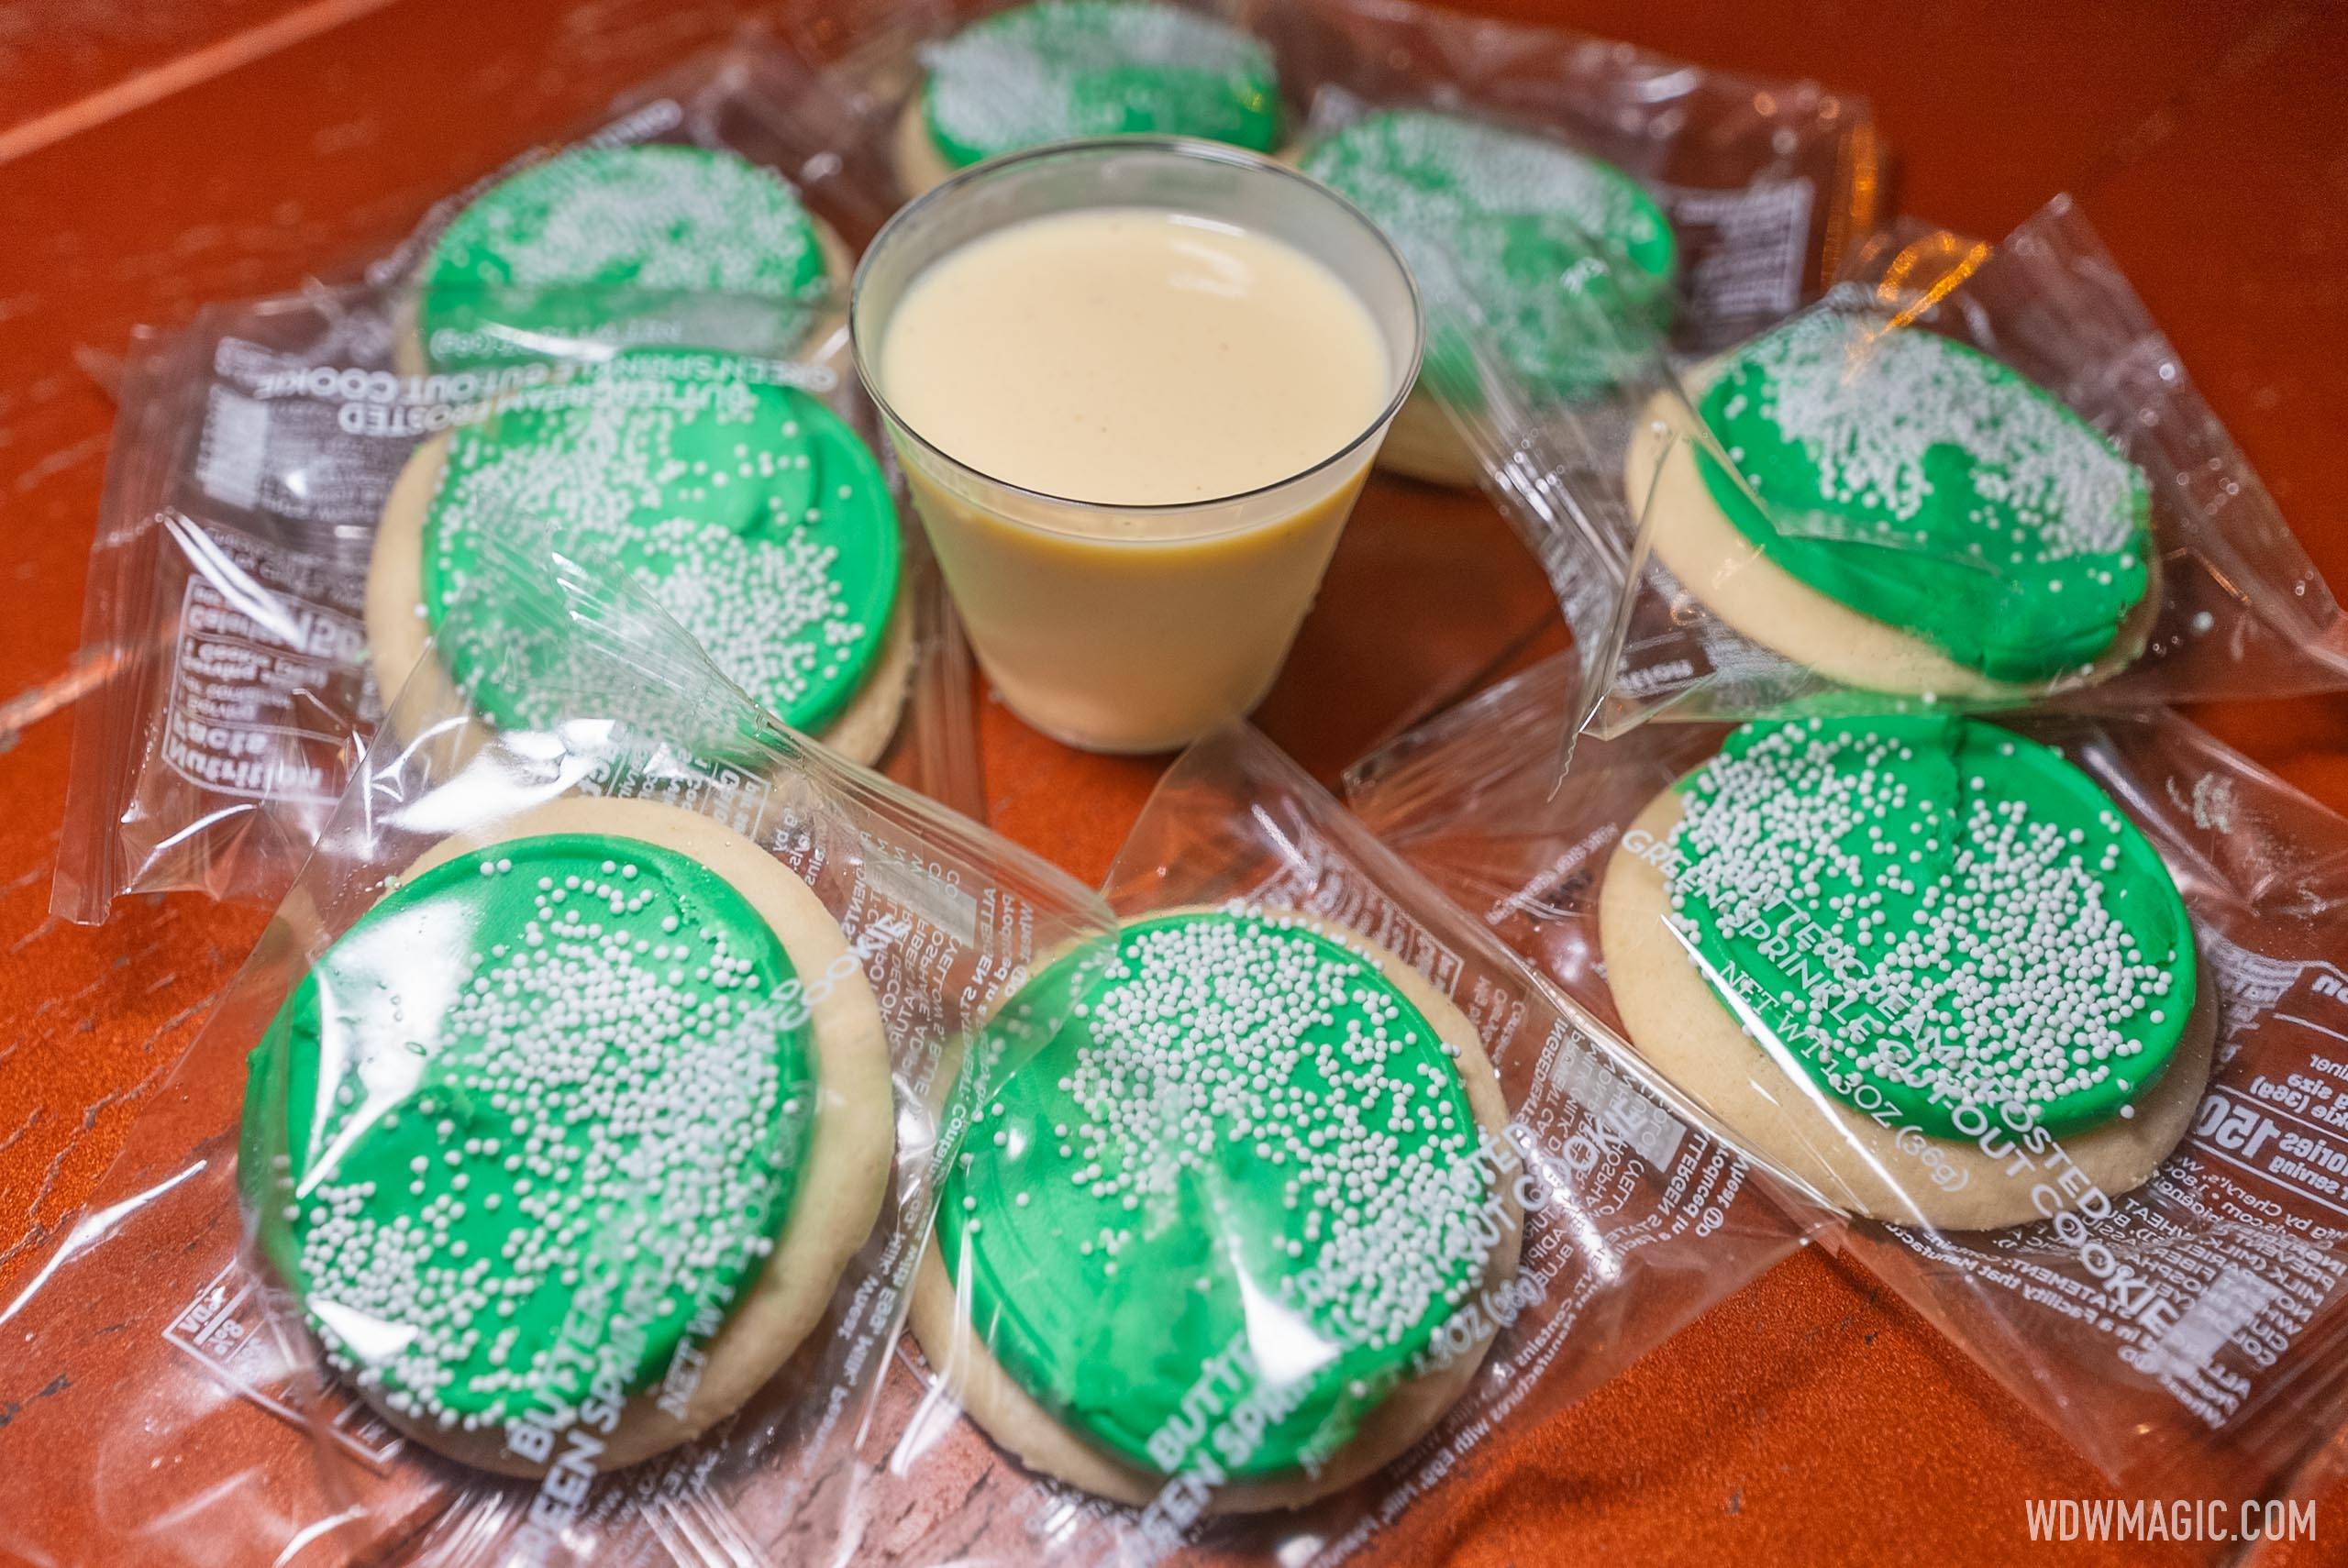 Tortuga Tavern - Egg Nog and Buttercream Frosted Green Sprinkle Cookie - 150 calories, 5g fat, 15g sugar